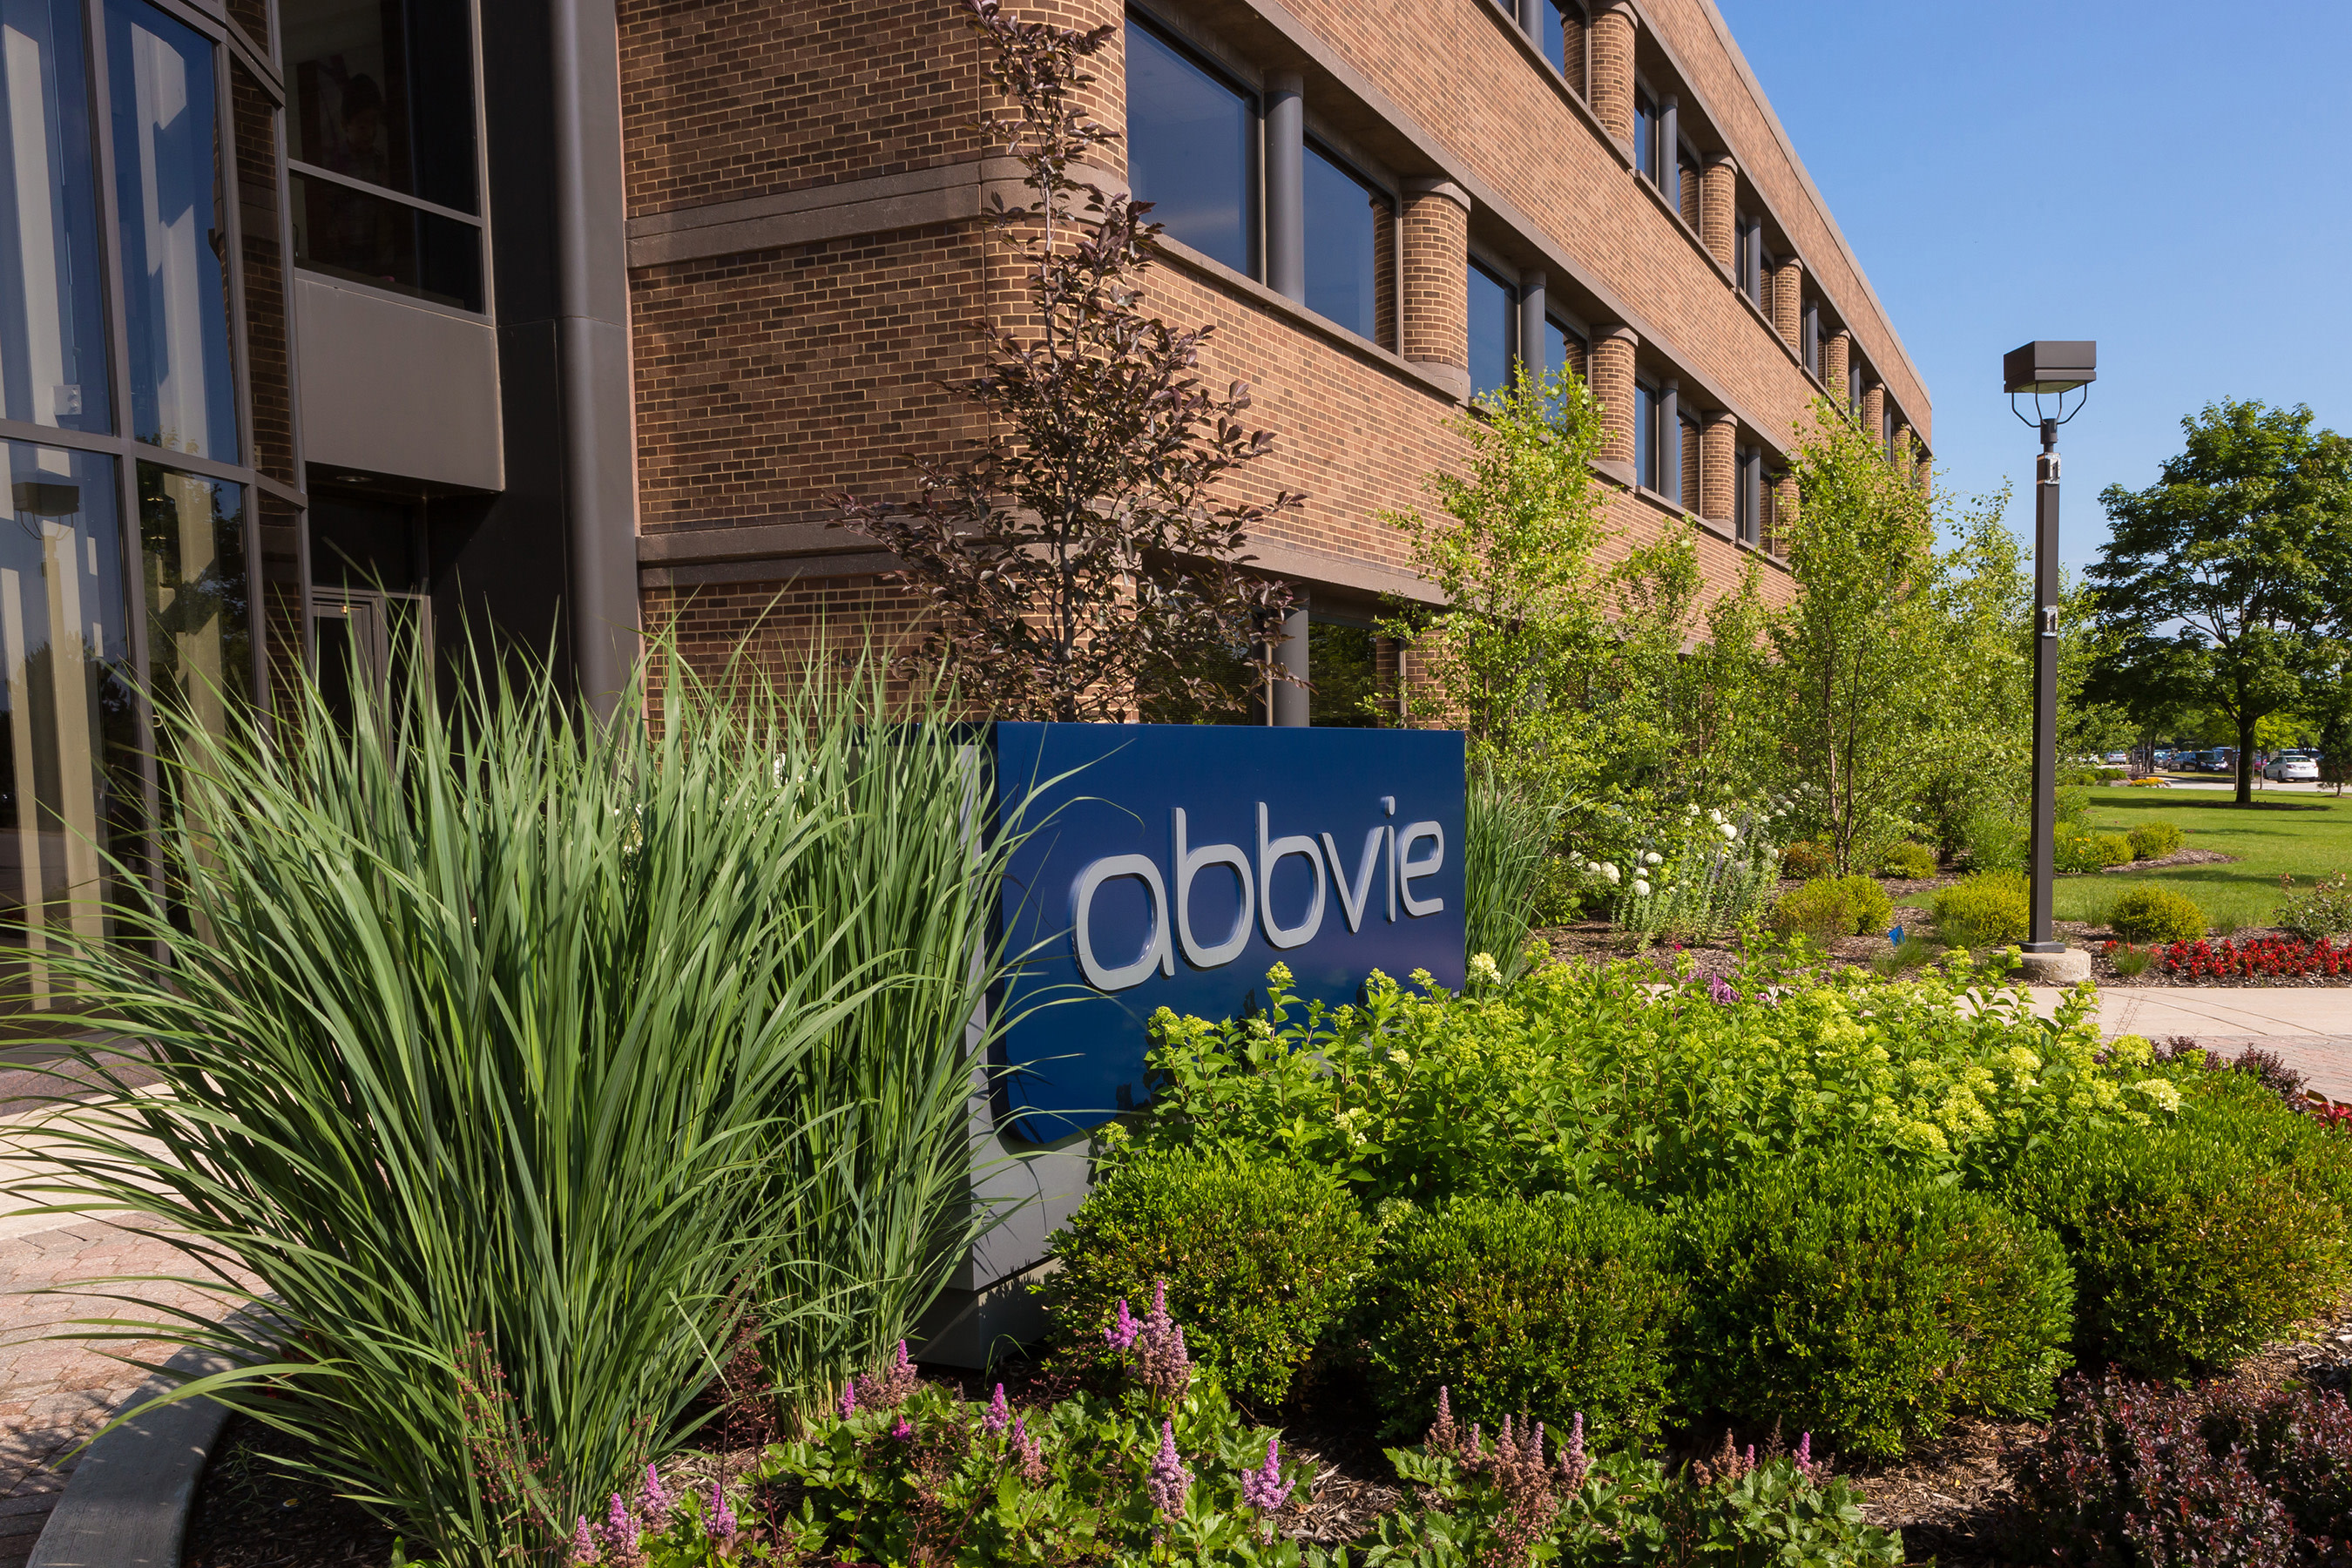 AbbVie Awards 45 Scholarships to U.S. Students Living with Chronic, Immune-Mediated Diseases in Their Pursuit of Higher Education